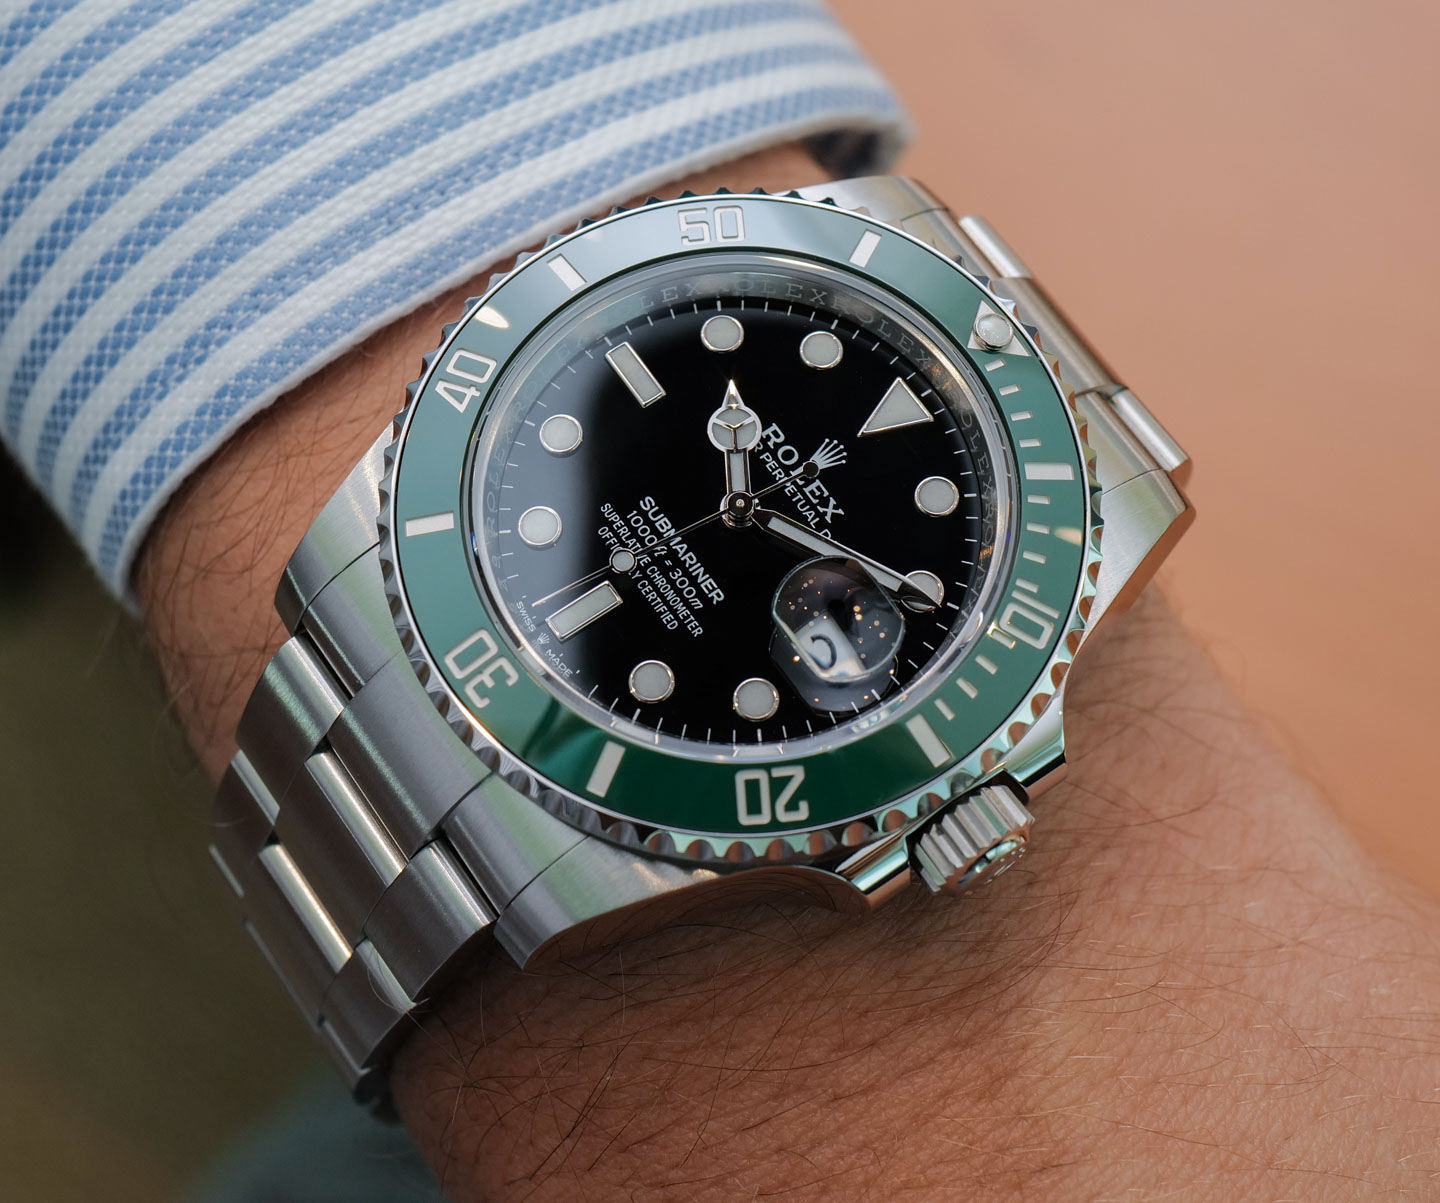 waiting list for submariner